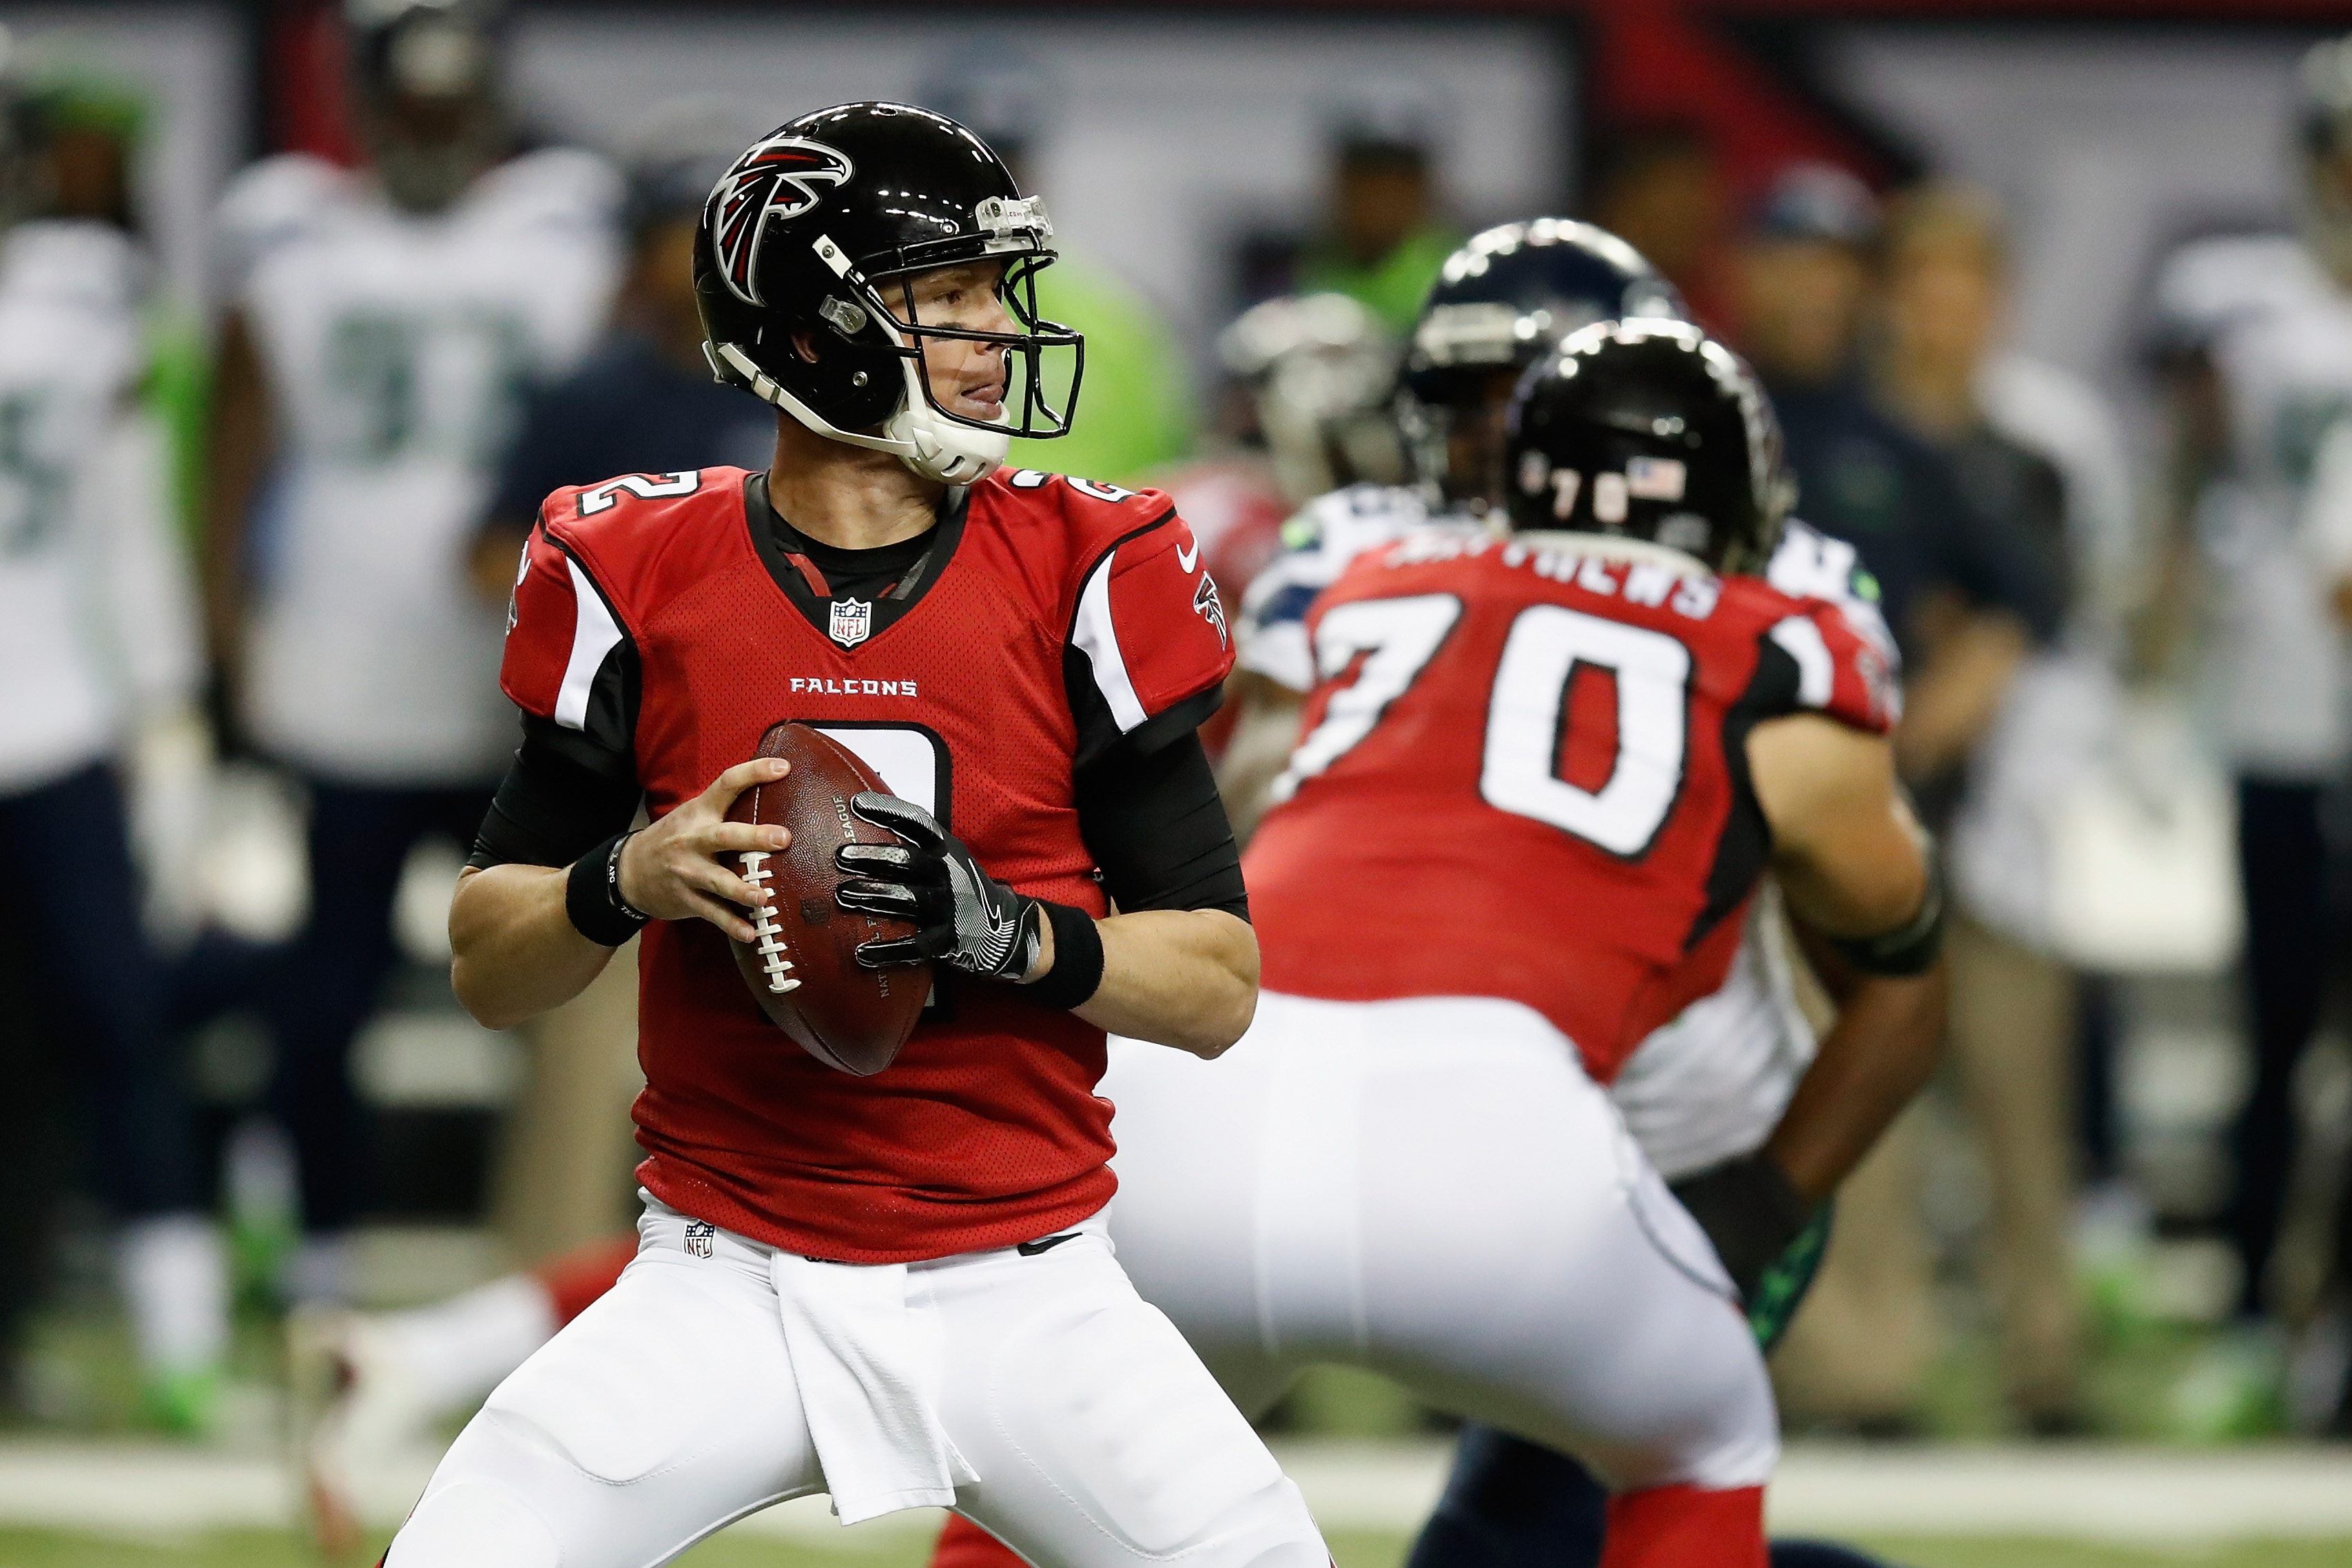 ATLANTA, GA - JANUARY 14:  Matt Ryan #2 of the Atlanta Falcons drops back to pass against the Seattle Seahawks during the game at the Georgia Dome on January 14, 2017 in Atlanta, Georgia.  (Photo by Gregory Shamus/Getty Images)